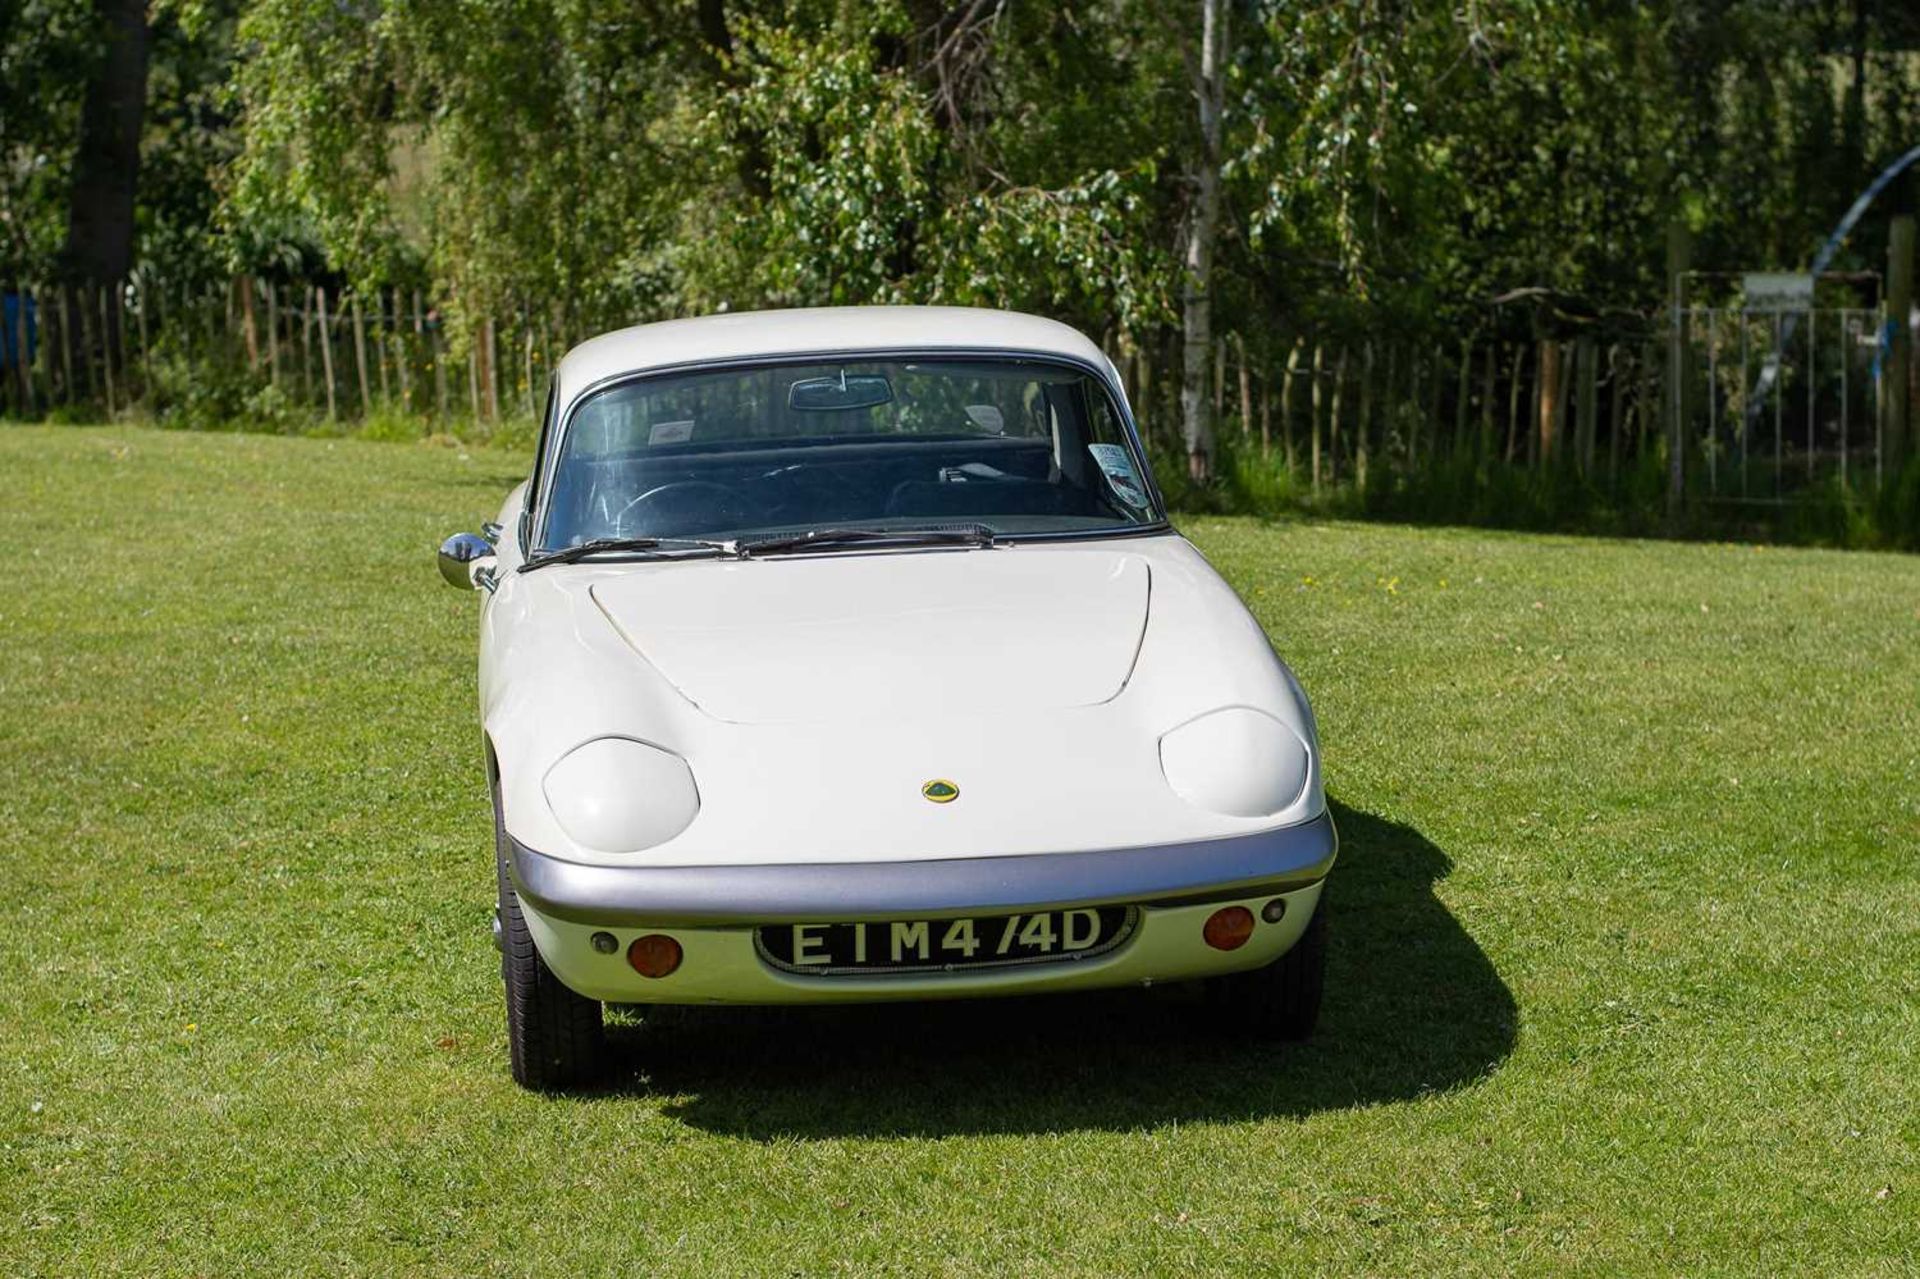 1966 Lotus Elan Fixed Head Coupe Sympathetically restored, equipped with desirable upgrades - Image 9 of 100